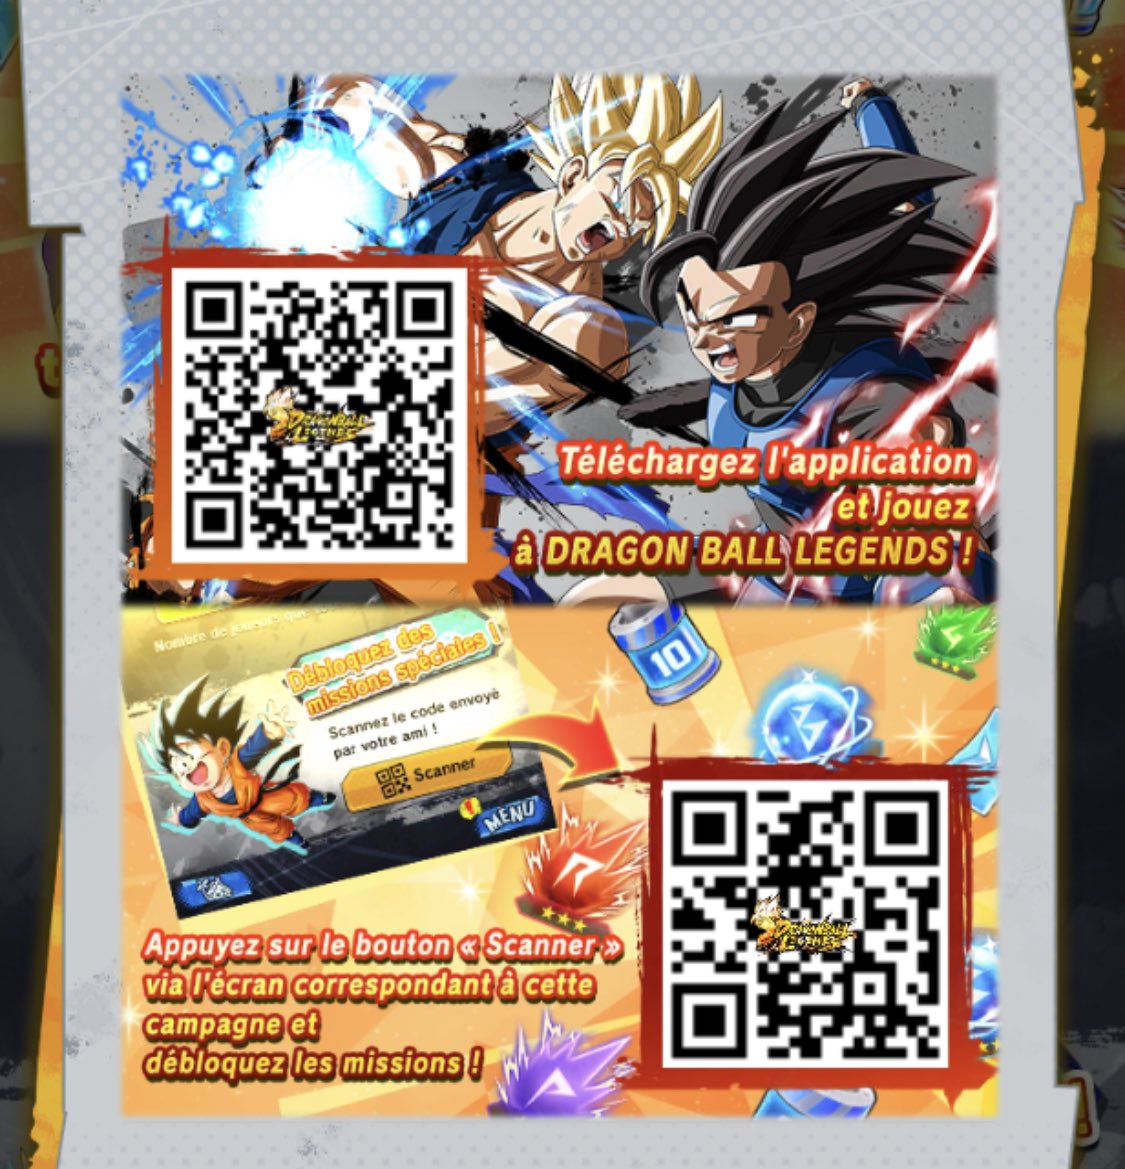 Dragon Ball Legends On Twitter New Legends Missions Are Here To Celebrate The 3rd Anniversary New Missions Will Be Added To More Legends Missions Complete All The Missions Including The Newly Added